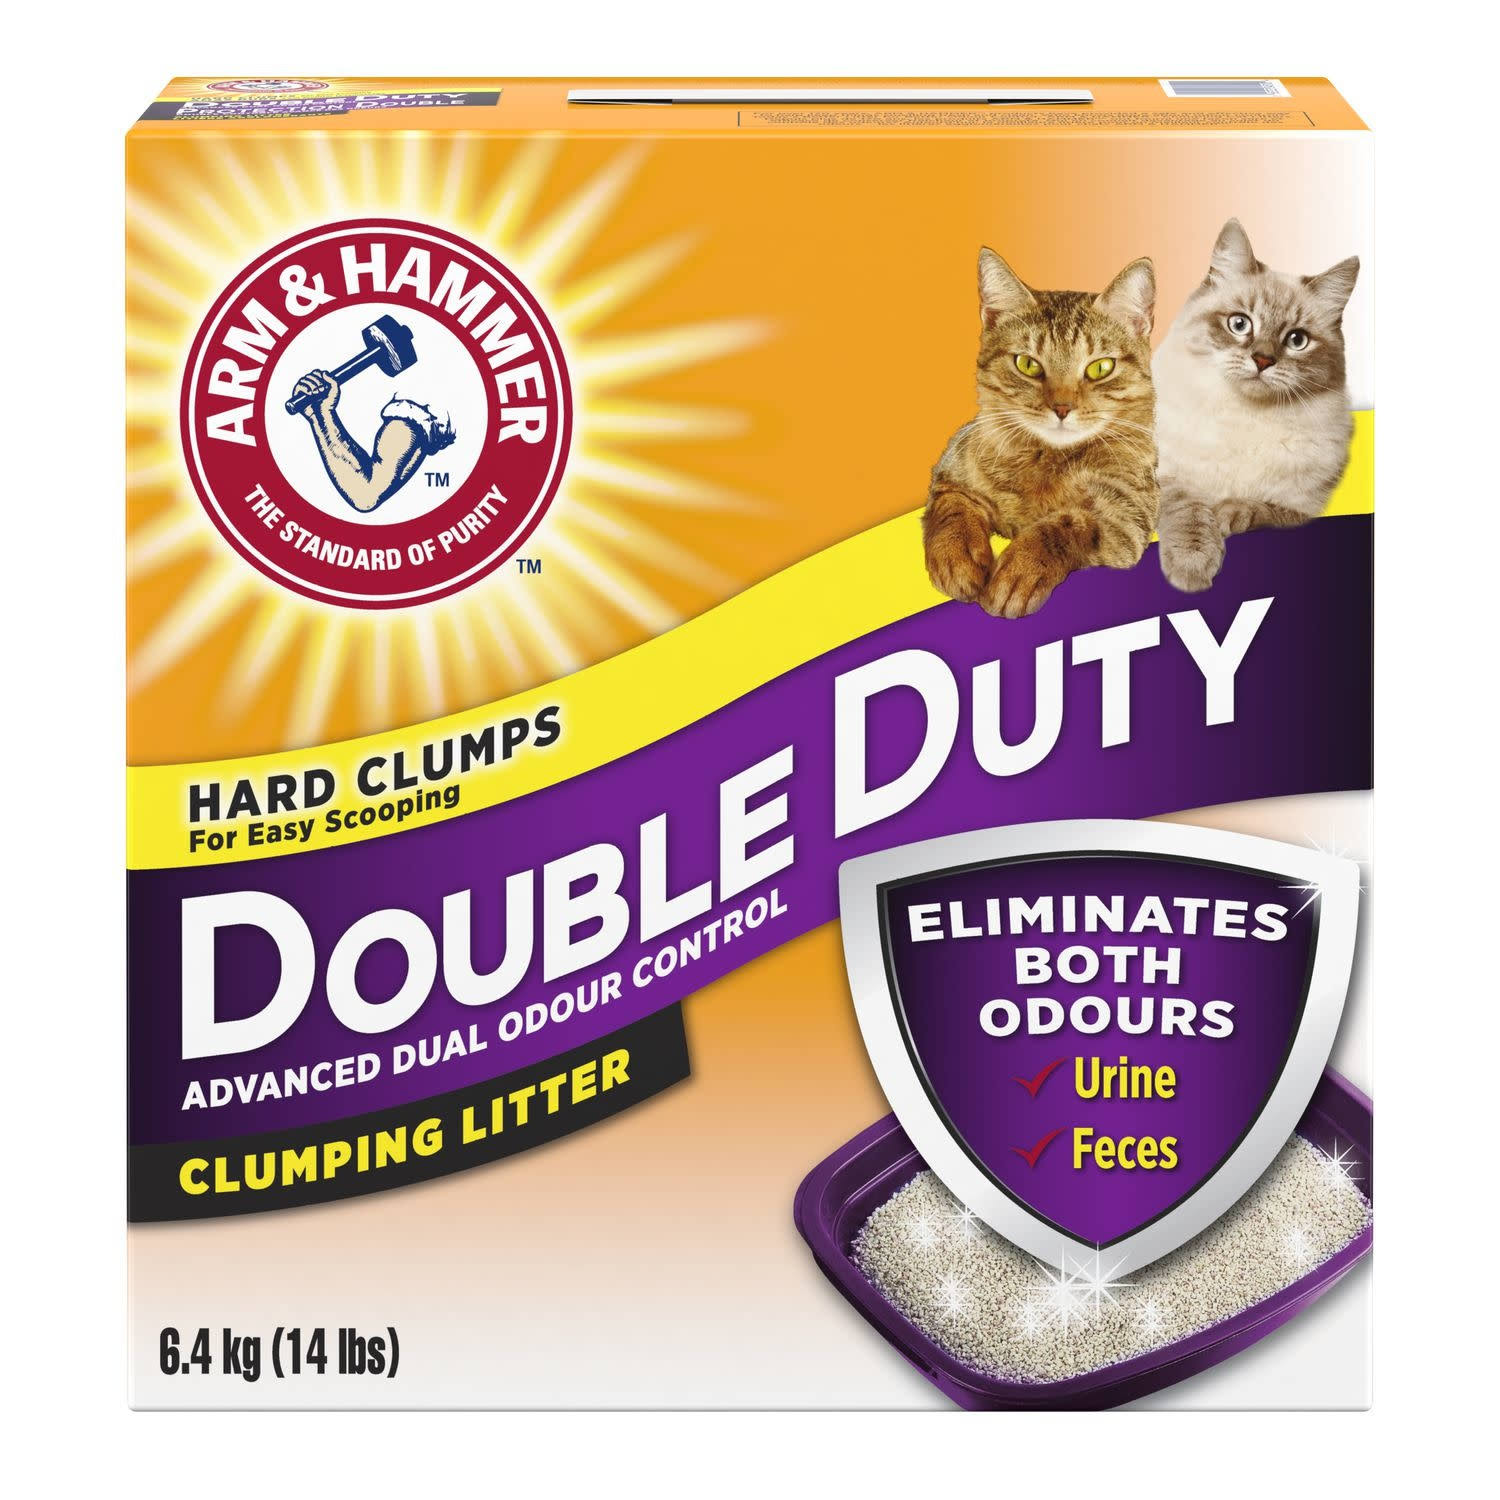 Arm & Hammer Double Duty Advanced Odour Control Clumping Litter - 6.4kg